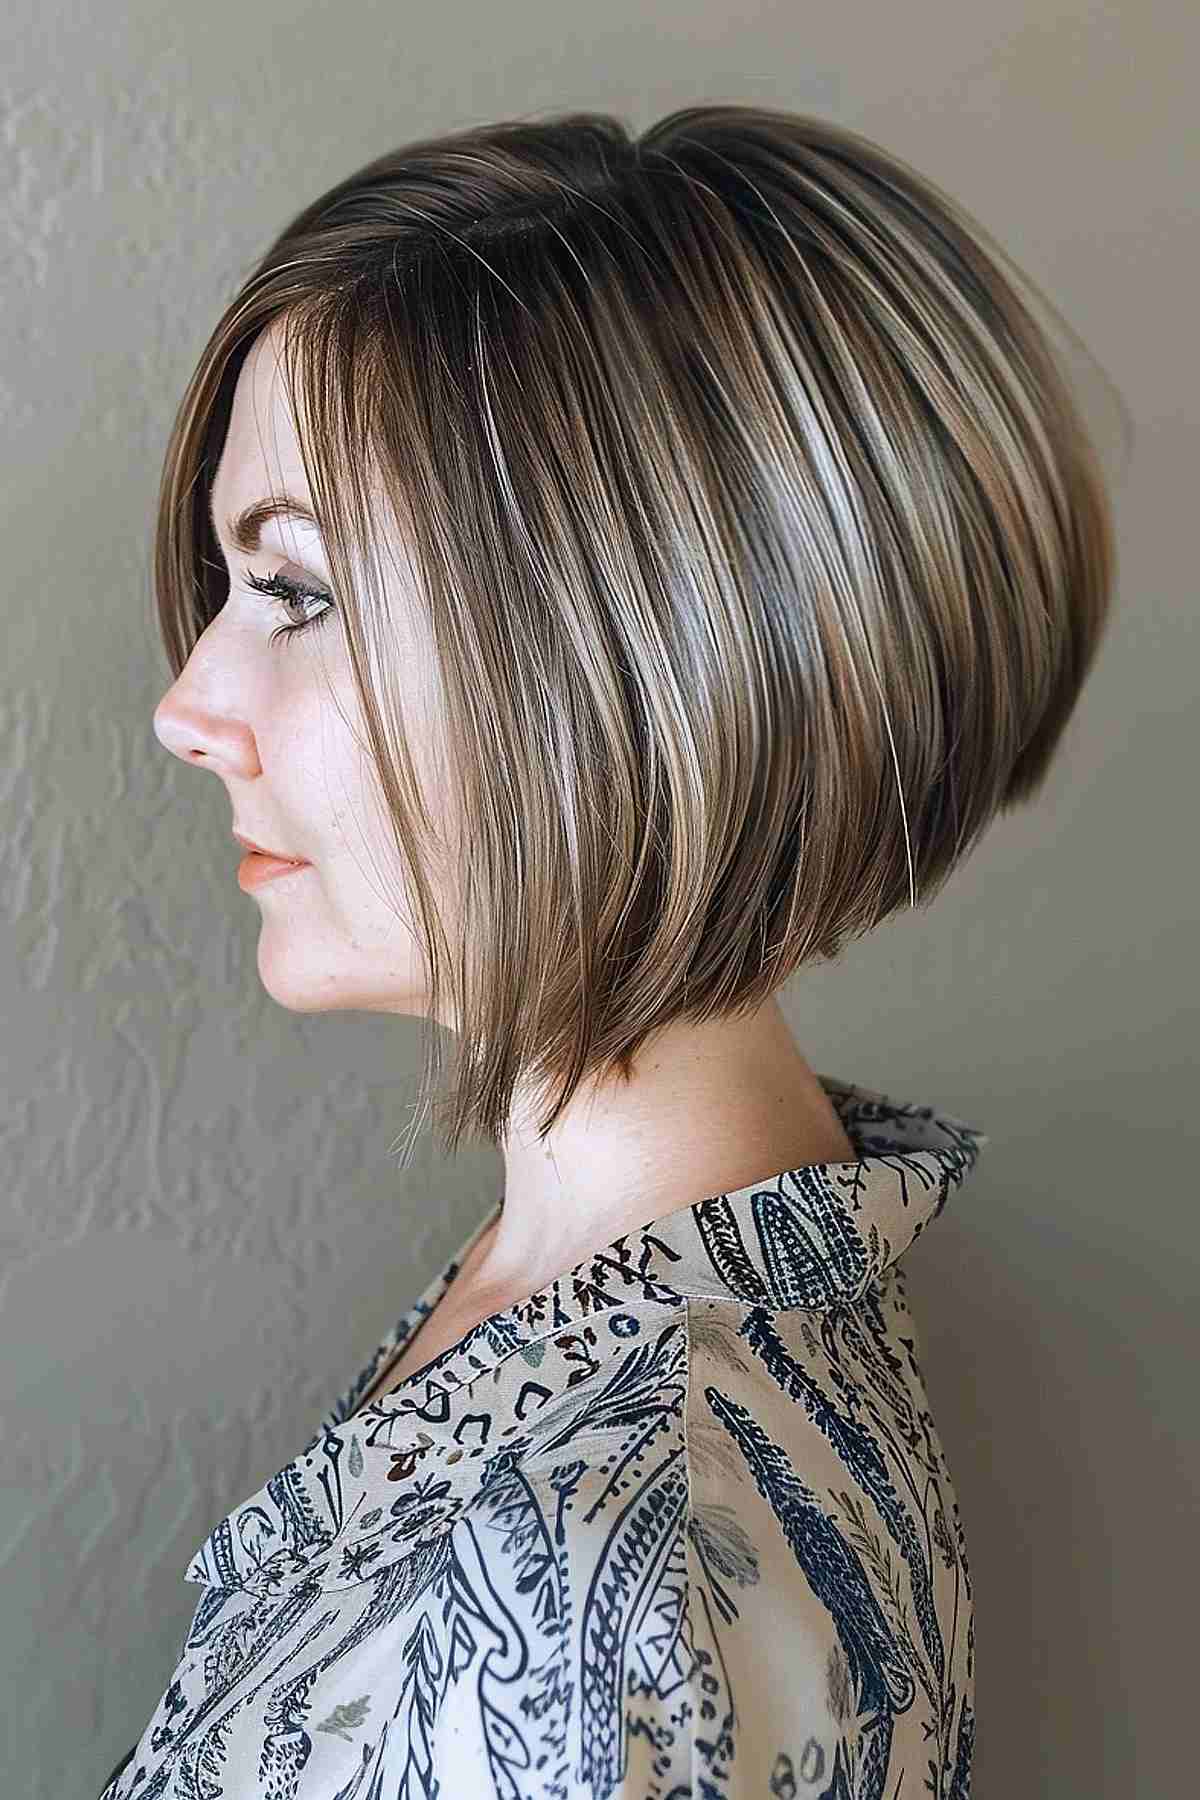 Trendy inverted bob hairstyle for thick hair with sleek layers and a graduated angle